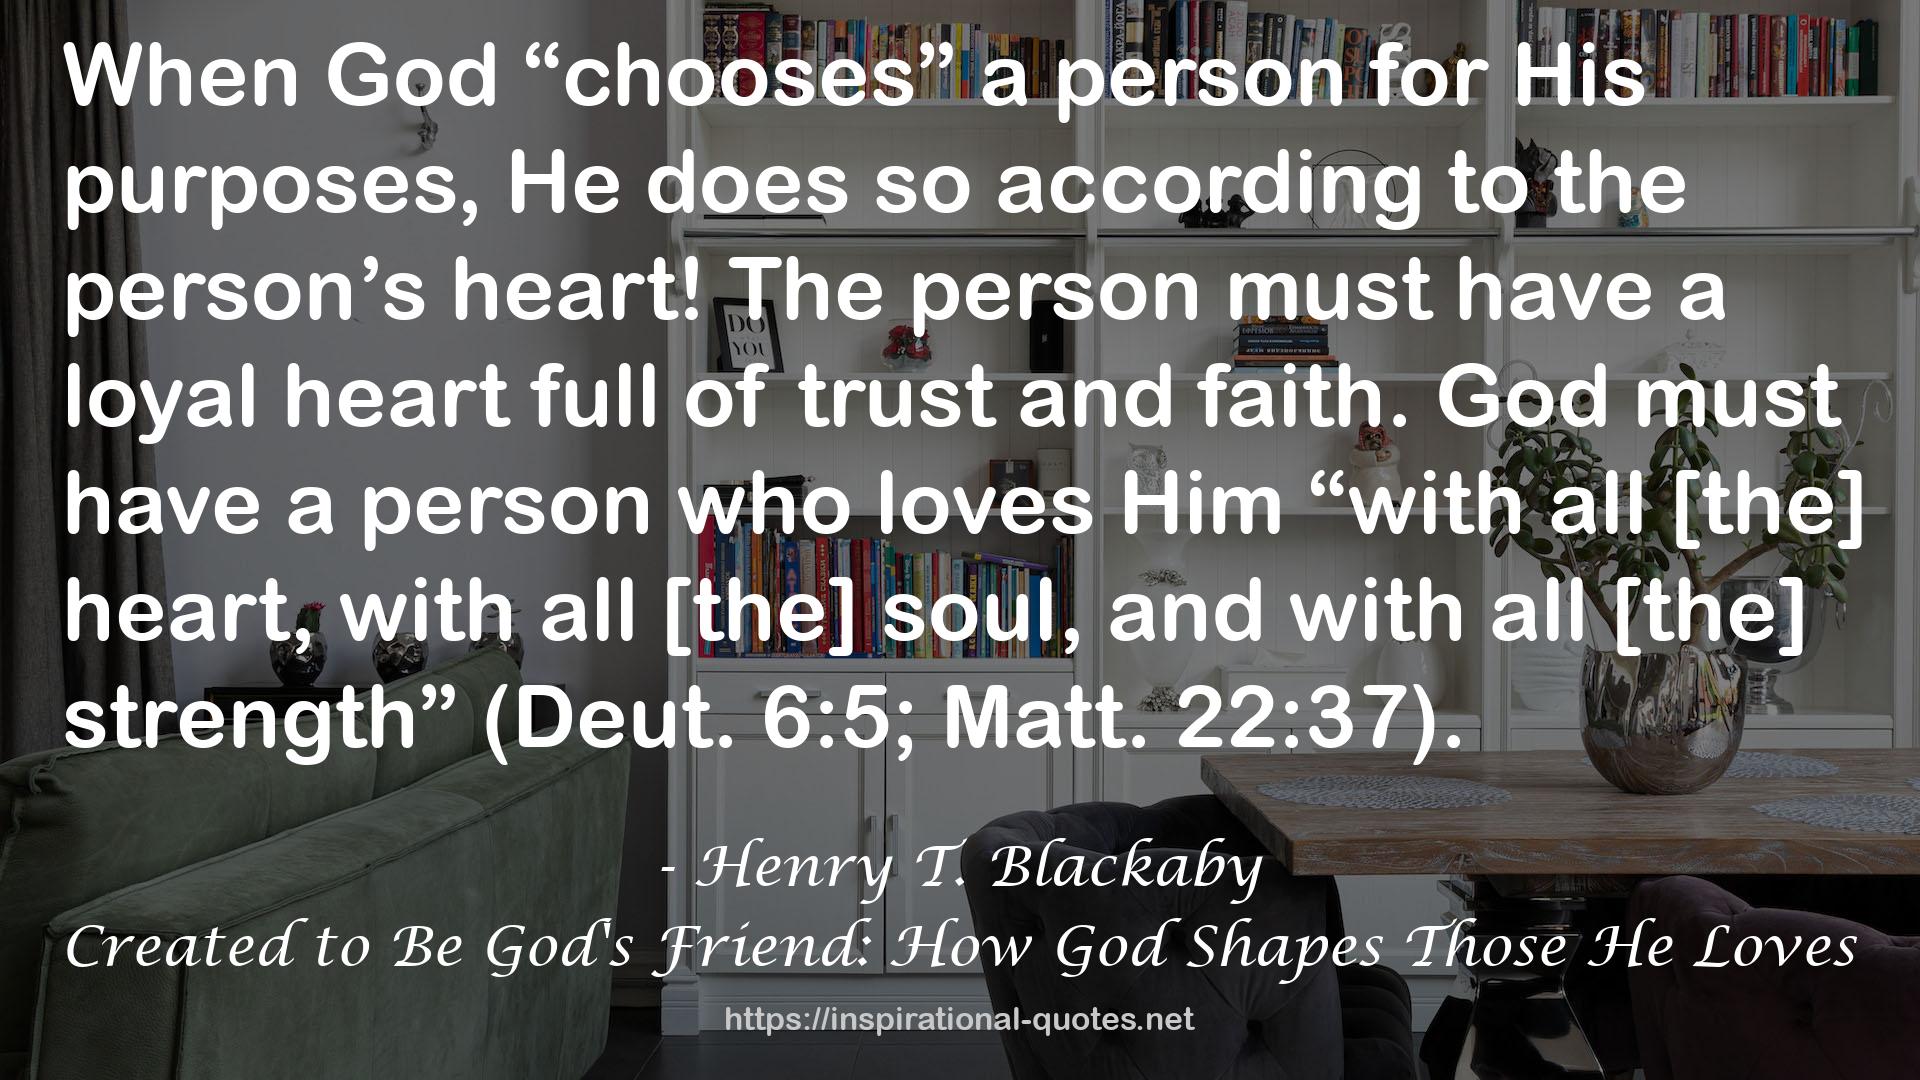 Created to Be God's Friend: How God Shapes Those He Loves QUOTES